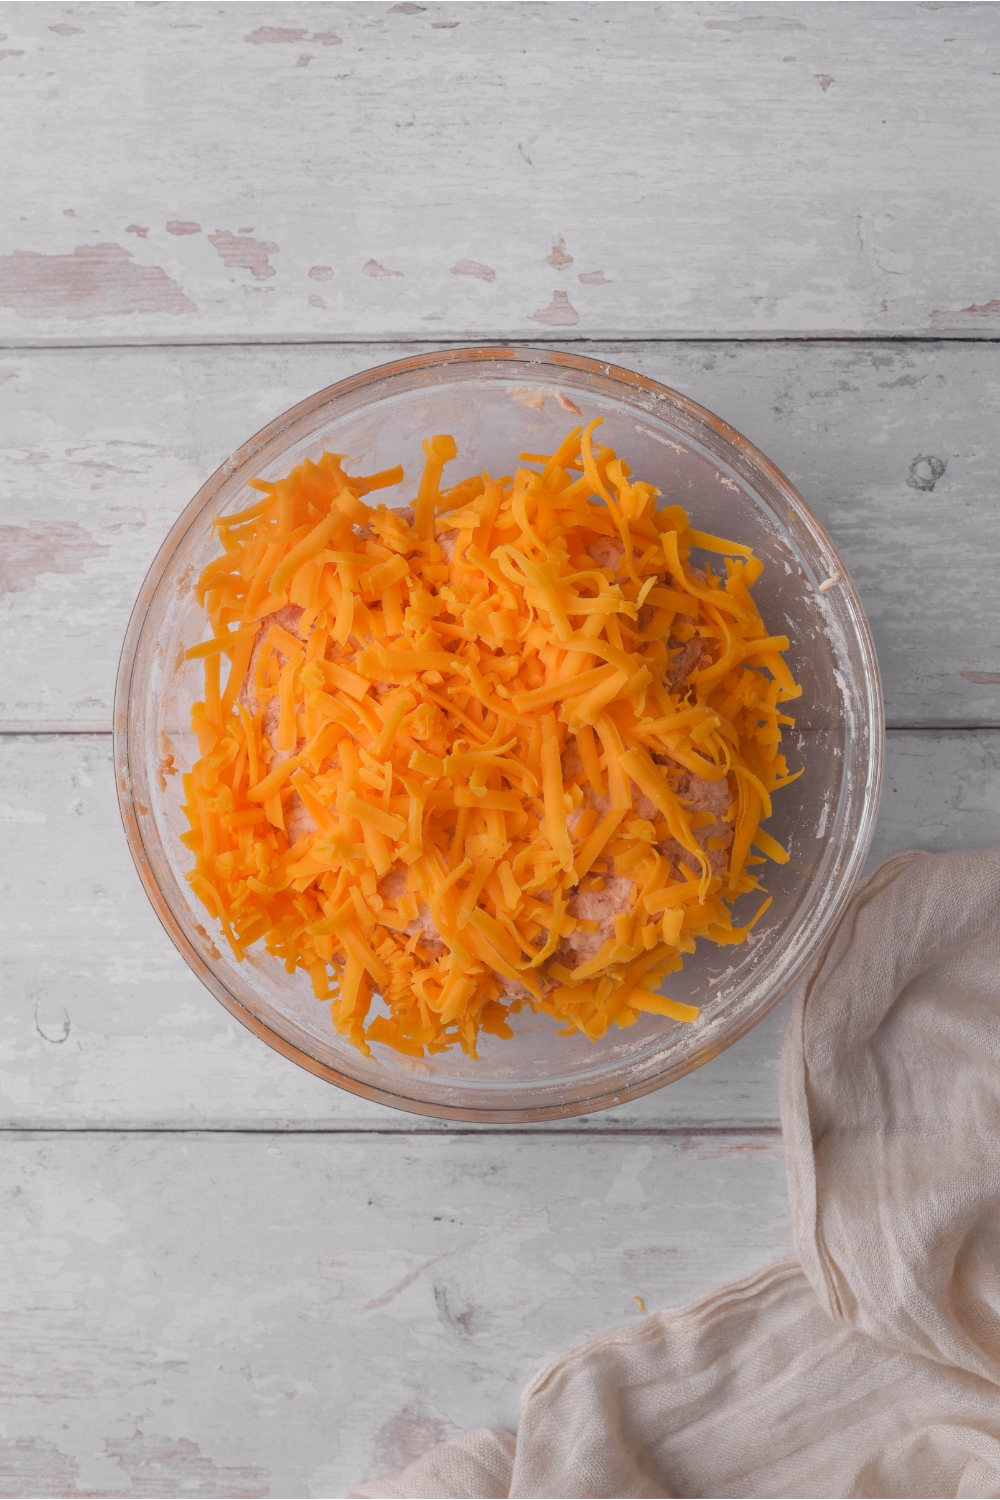 A clear bowl filled with shredded cheese.